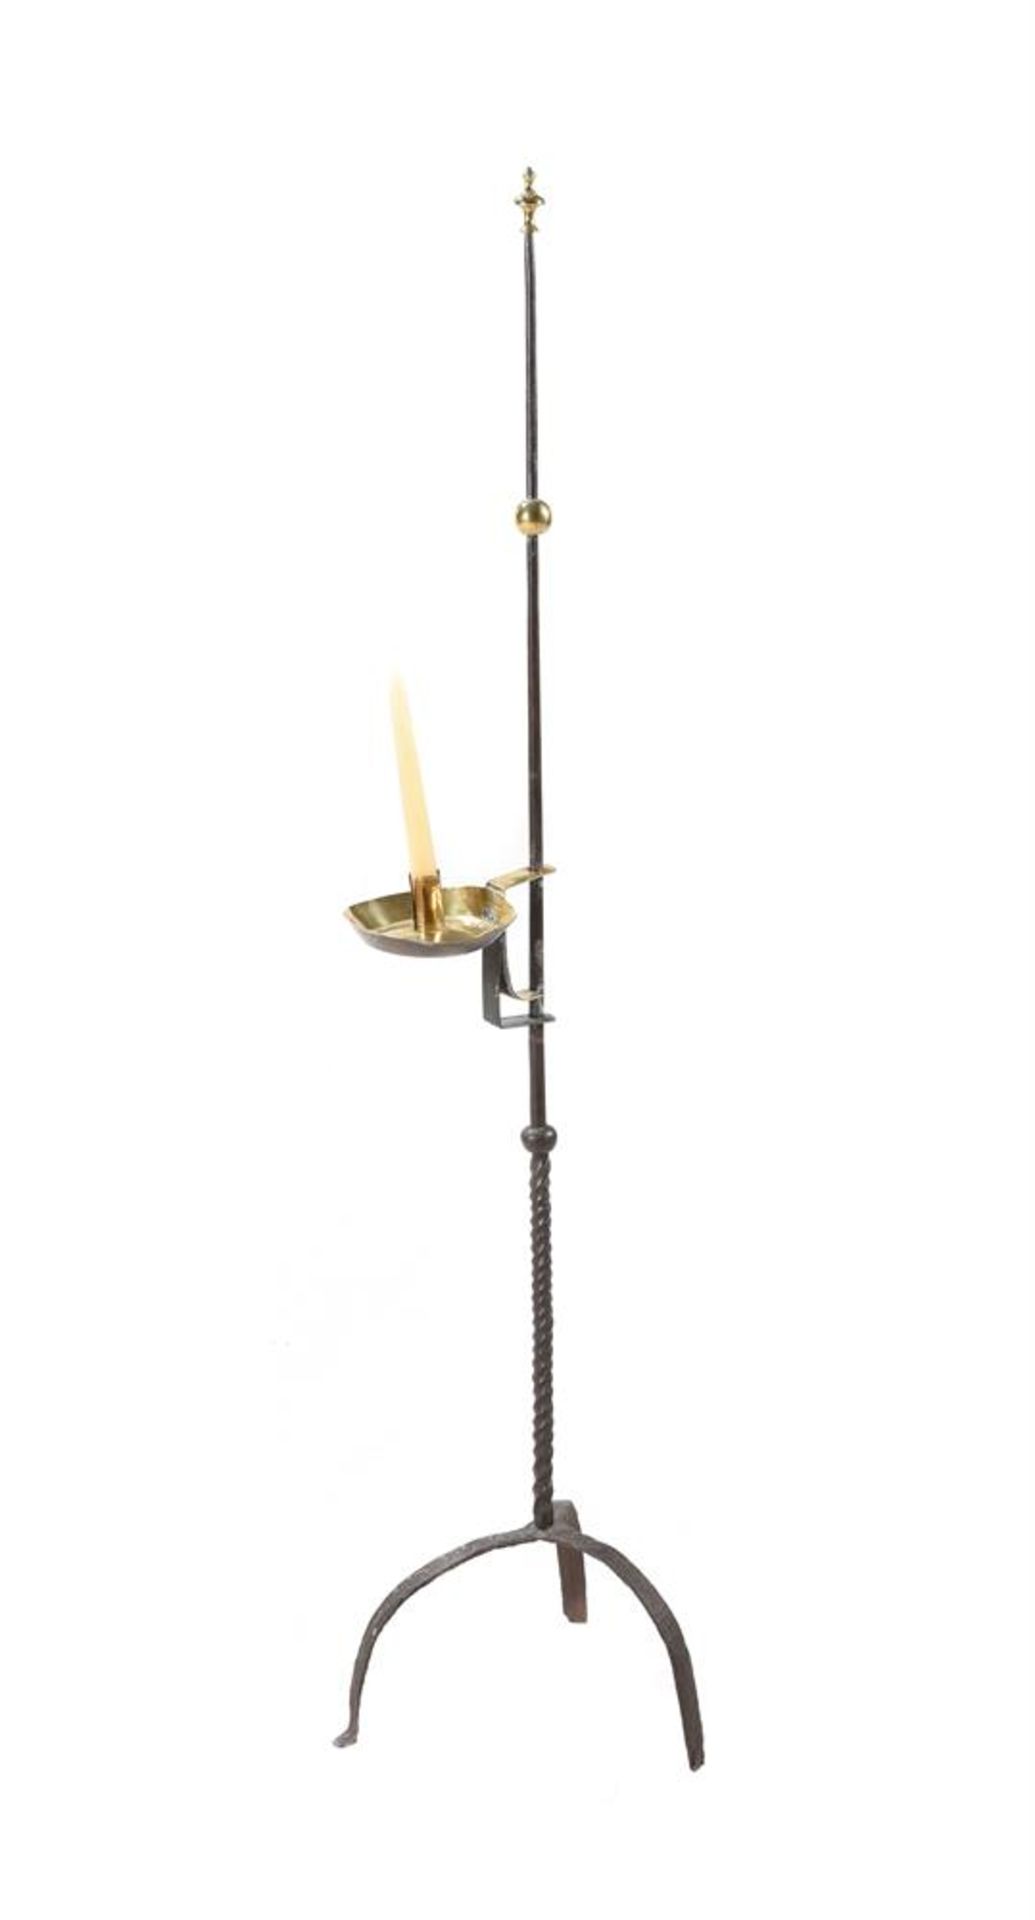 A BRASS AND STEEL CANDLE OR RUSH STAND